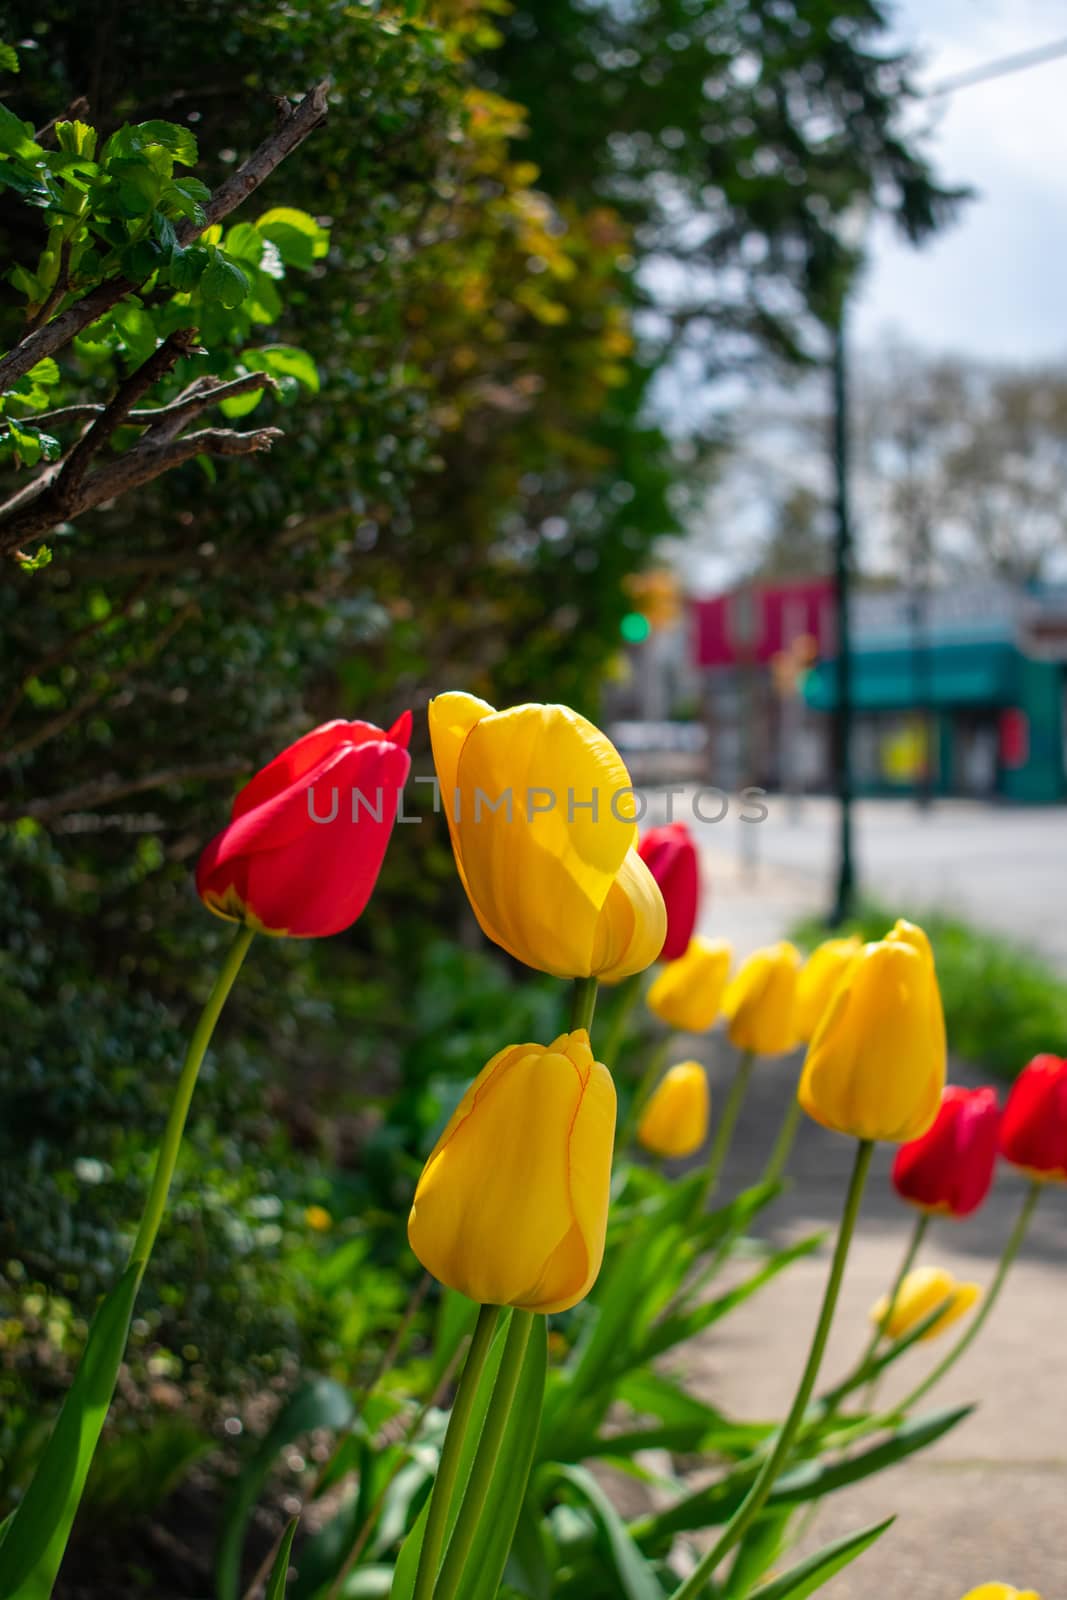 A Patch of Fresh Yellow and Red Tulips Next to a Suburban Sidewalk